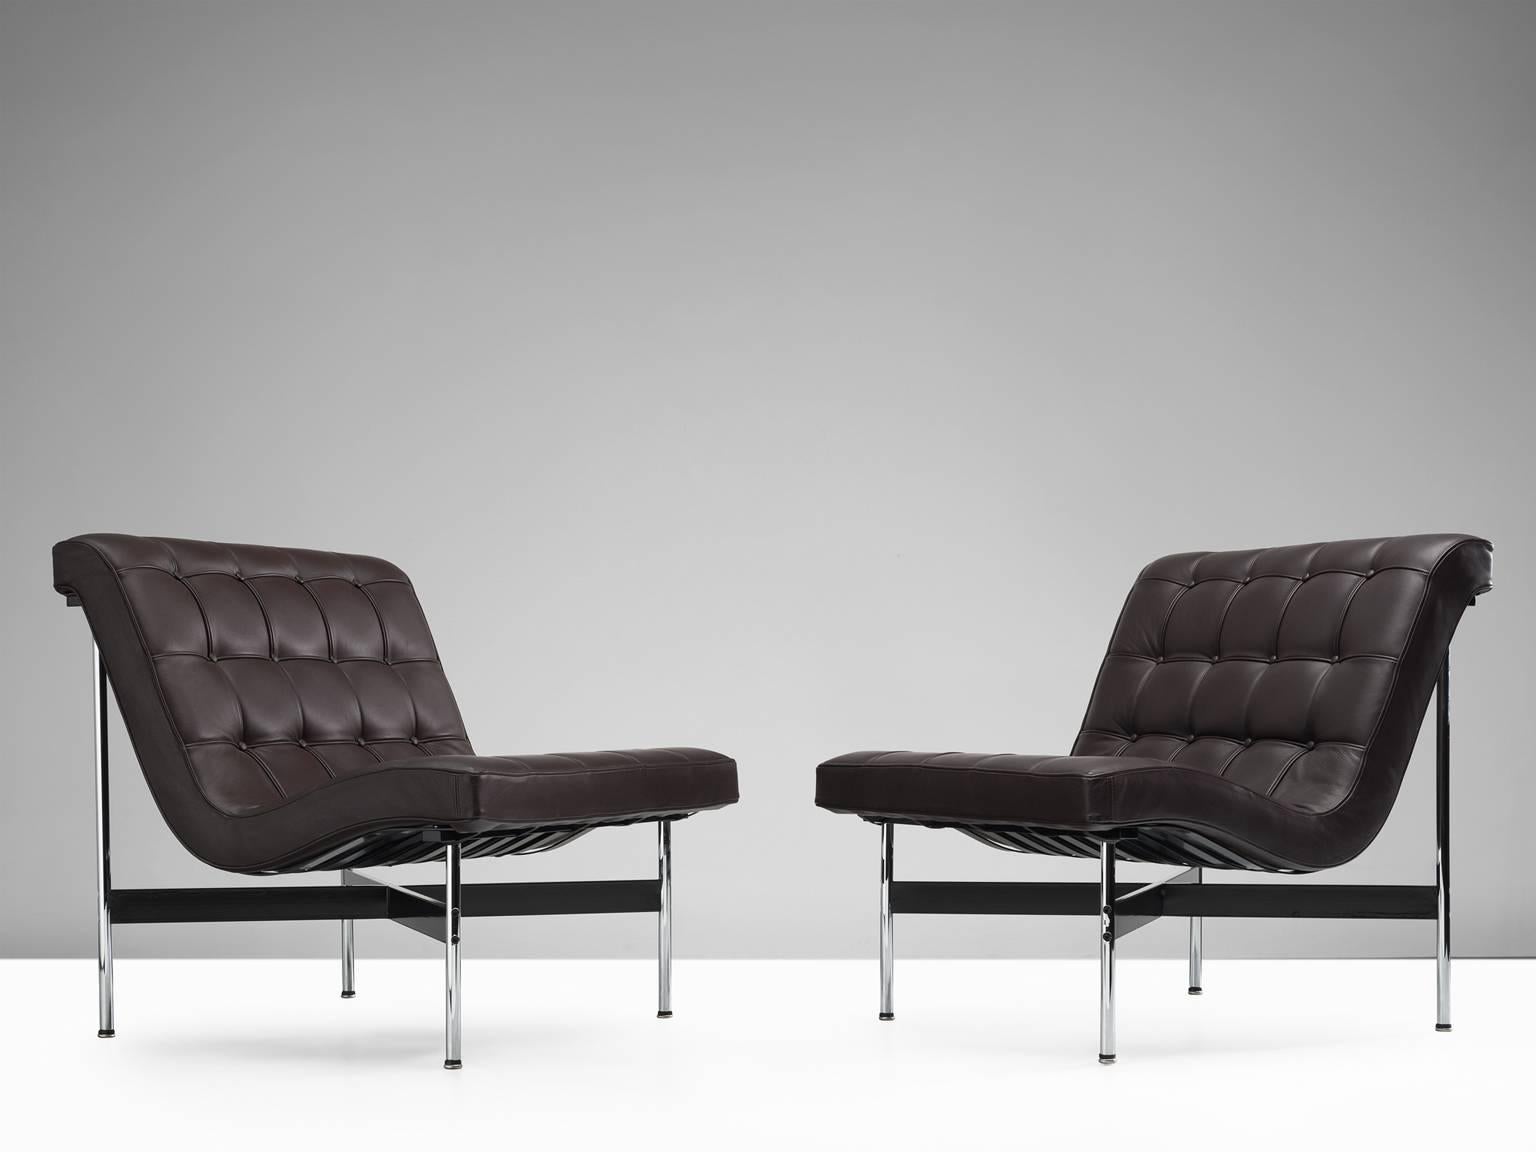 William Katavolos, Ross Littell and Douglas Kelley for Laverne International, pair of lounge chairs, faux leather, steel, 1950s design, 1980s production, United States.

A pair of lounge chairs designed by William Katavolos, Ross Littell and Douglas